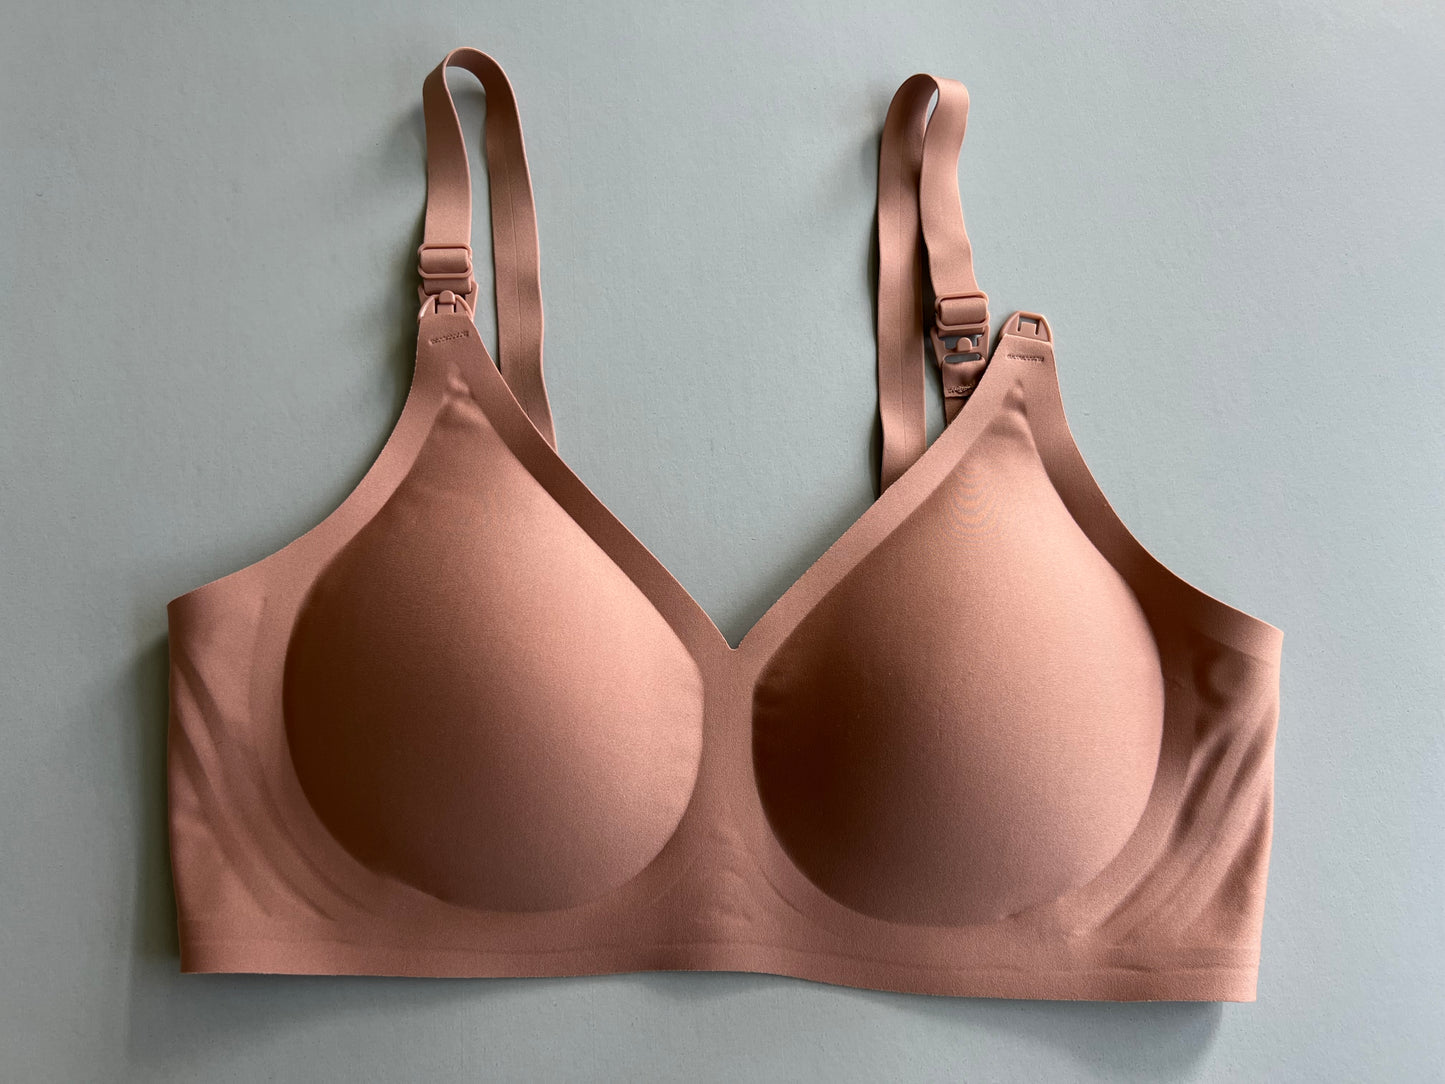 A Busy Mom's Guide to Caring for Nursing Bras - Heritage Park